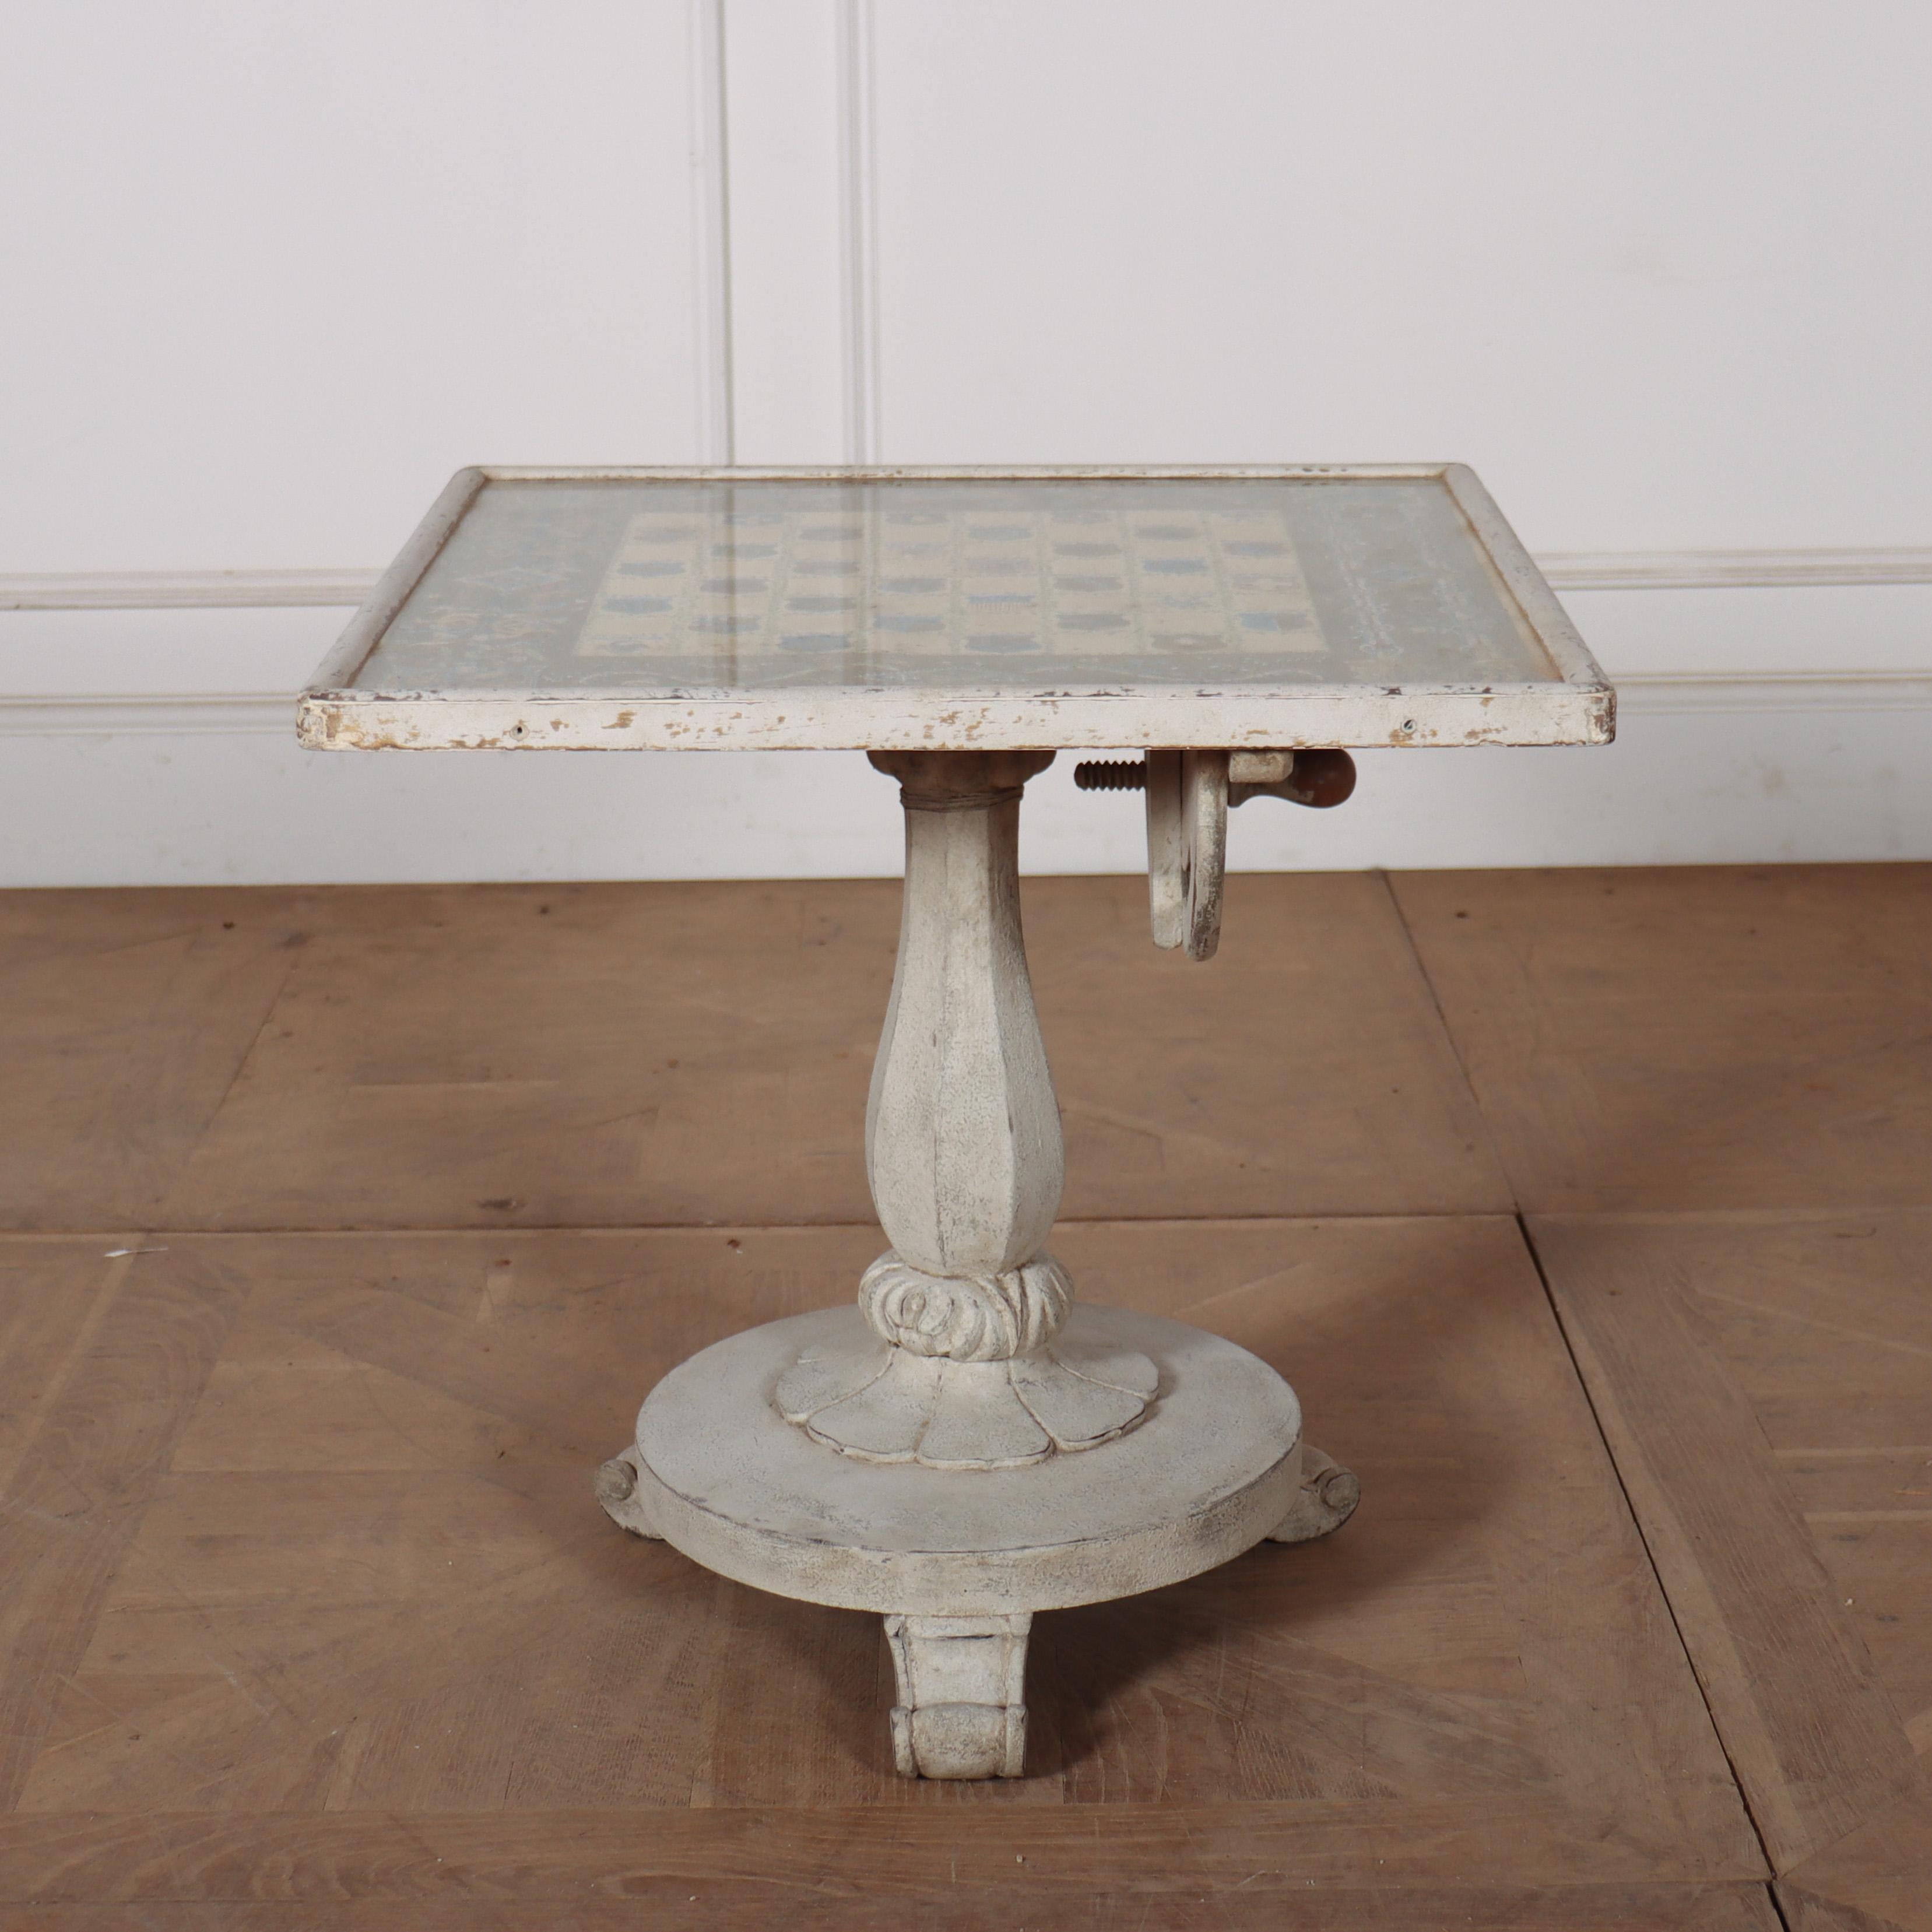 Small 19th C lamp table with an unusually decorated top. 1890.

Reference: 8083

Dimensions
22.5 inches (57 cms) Wide
22.5 inches (57 cms) Deep
22.5 inches (57 cms) High